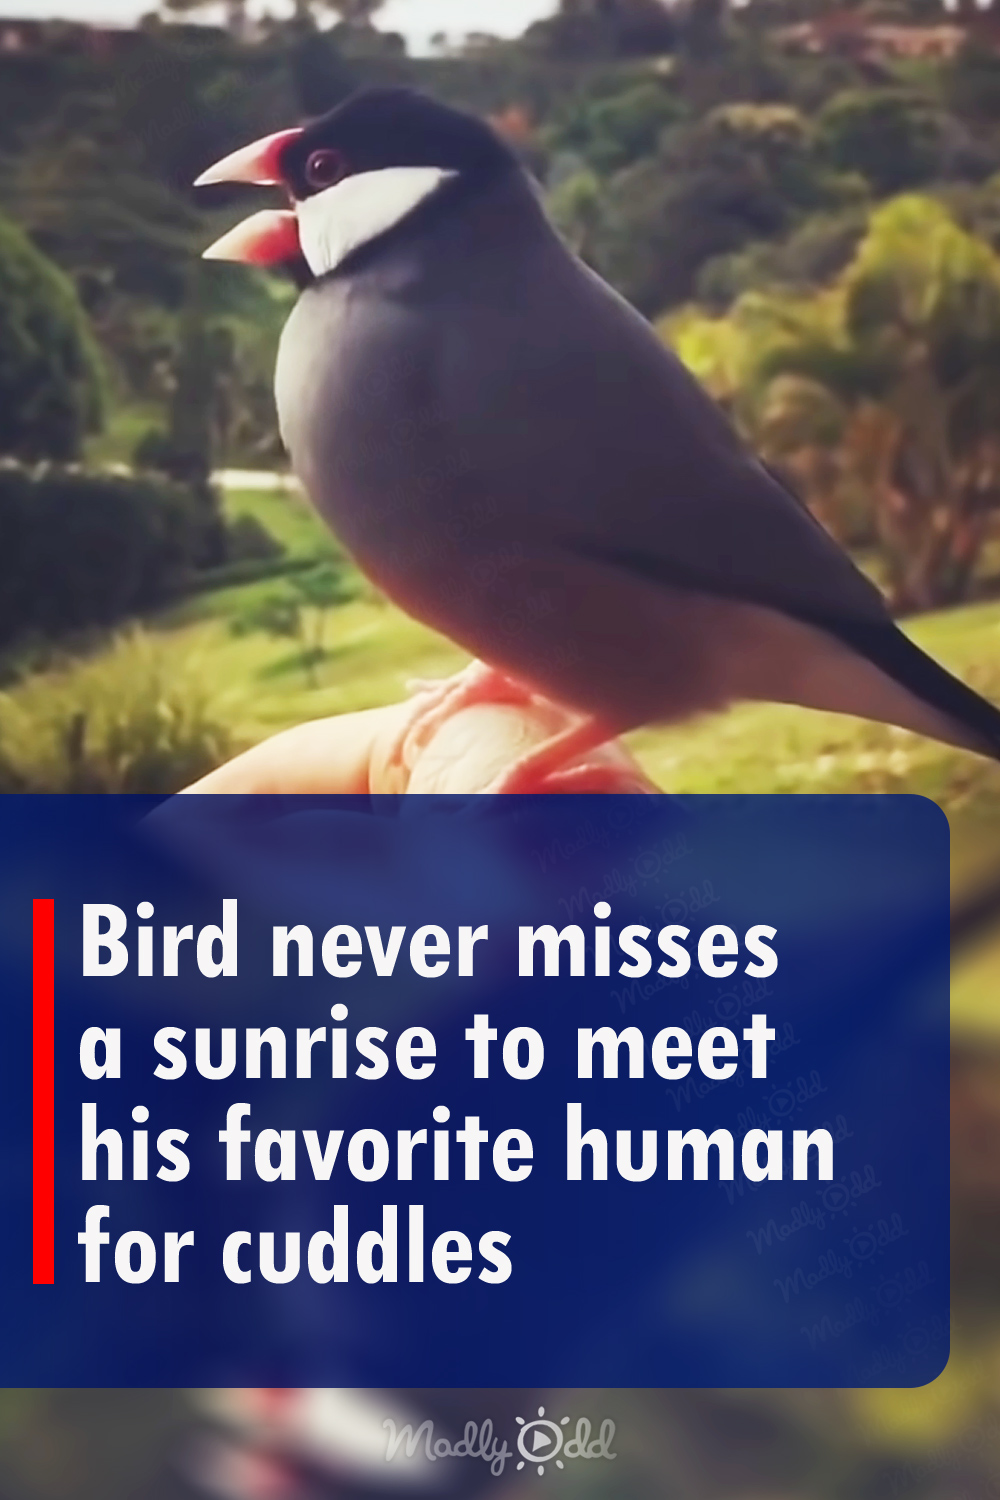 Bird never misses a sunrise to meet his favorite human for cuddles